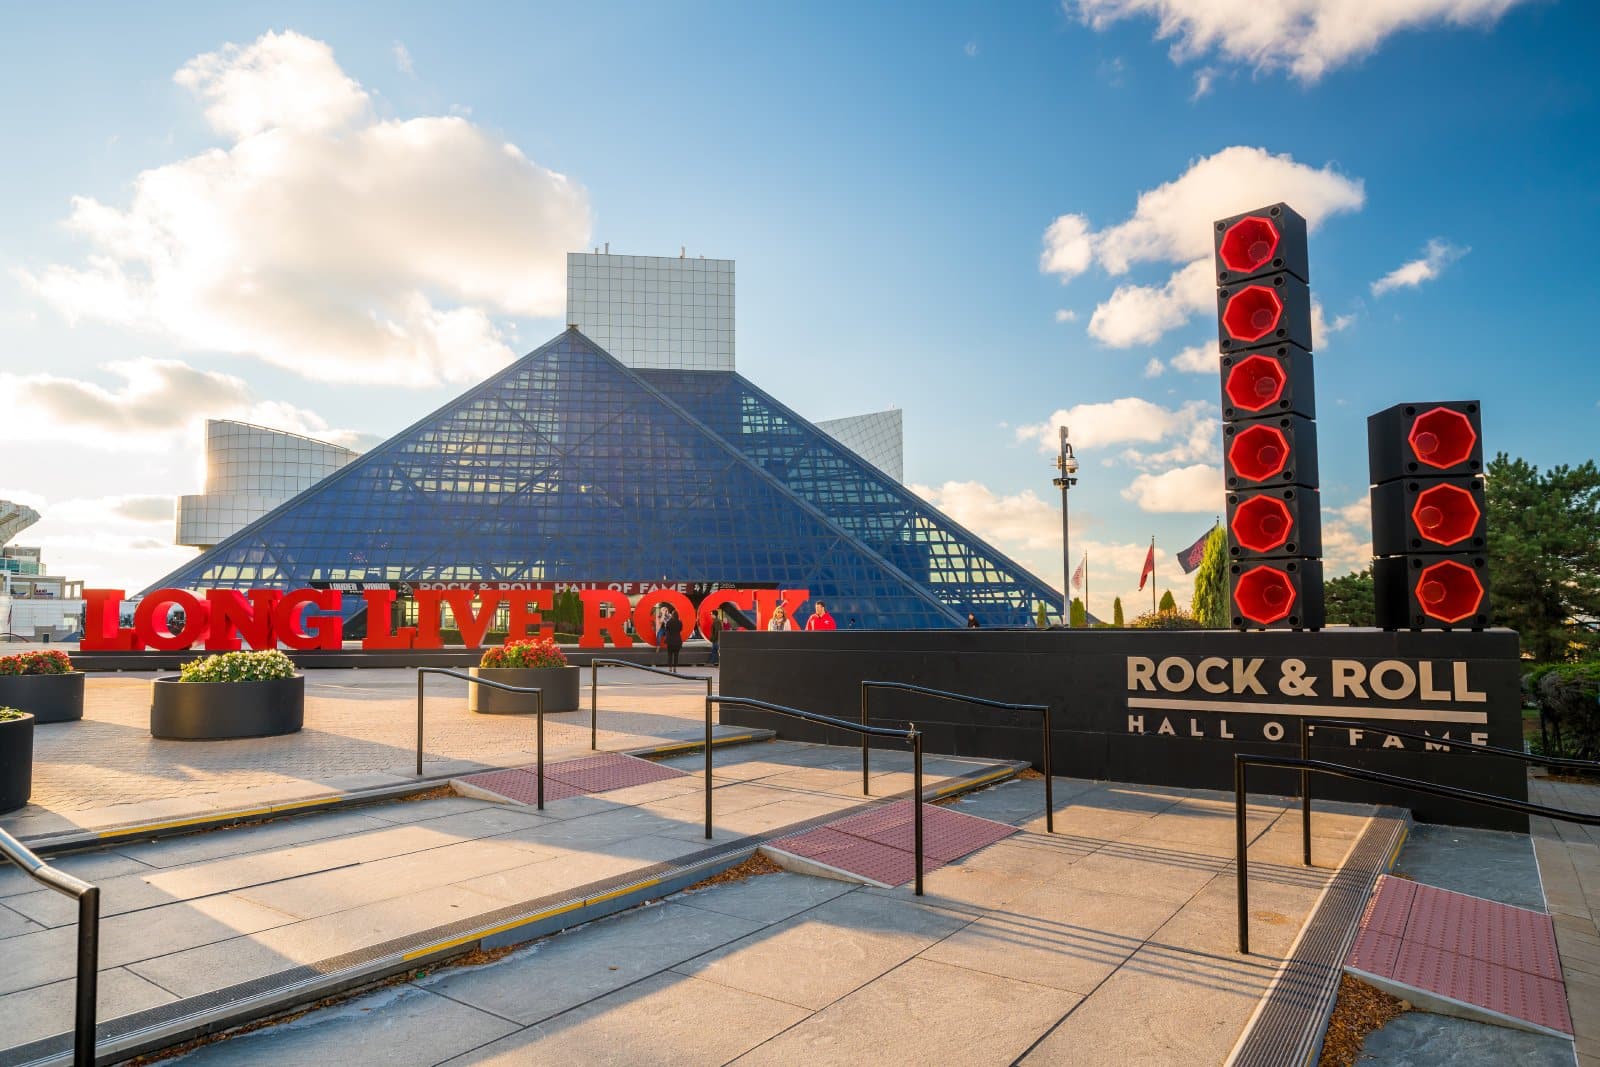 <p class="wp-caption-text">Image Credit: Shutterstock / f11photo</p>  <p><span>The Rock & Roll Hall of Fame, located on the shores of Lake Erie in Cleveland, is a modern museum dedicated to honoring and preserving the history of the most influential artists, producers, engineers, and other notable figures who have had a major impact on the development of rock ‘n’ roll. Its exhibits span genres and generations, featuring memorabilia, audio and video clips, and interactive stations.</span></p>